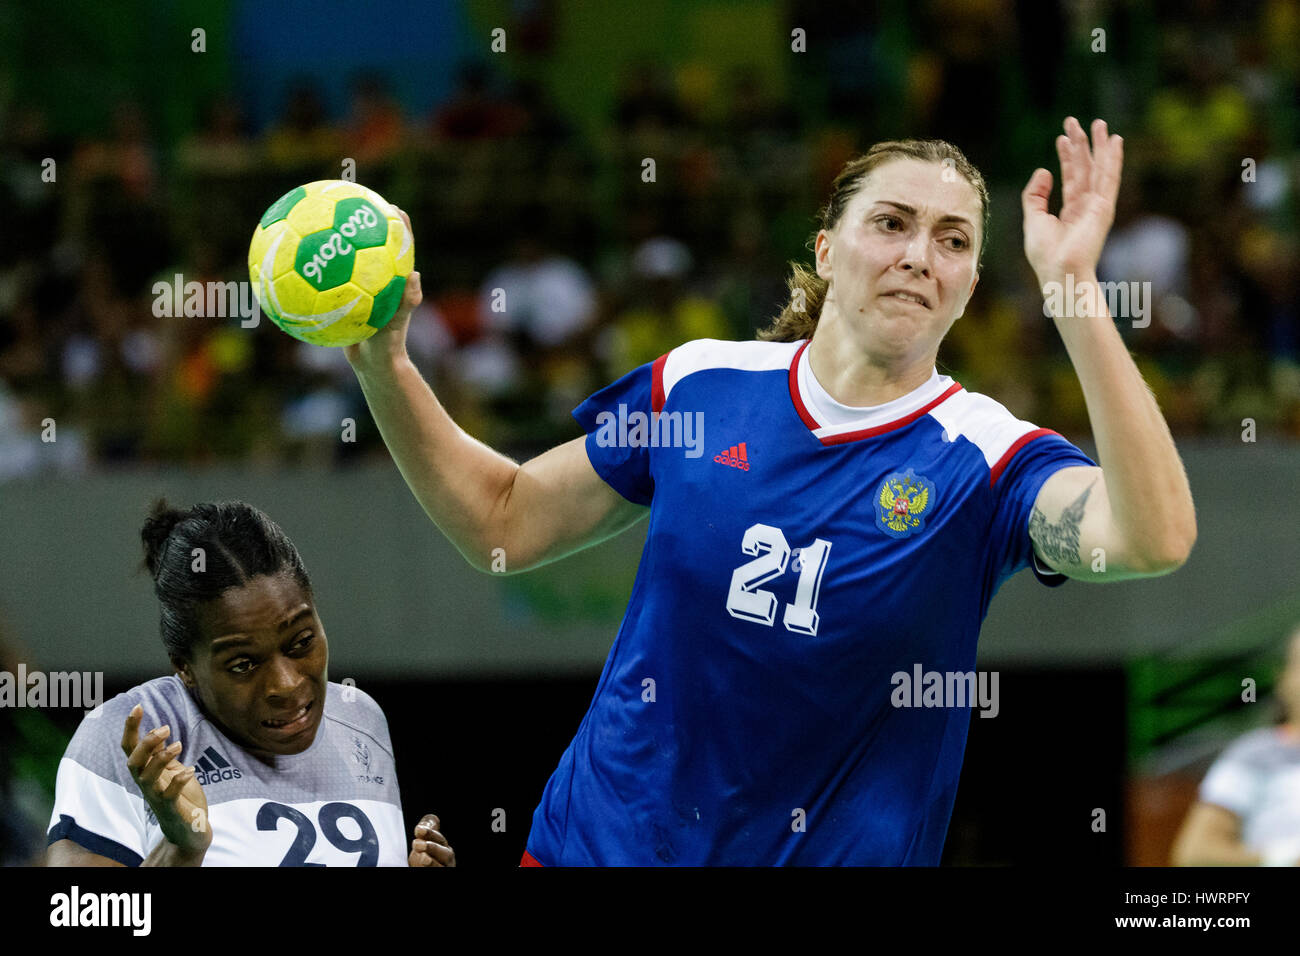 Rio de Janeiro, Brazil. 20 August 2016 Victoria Zhilinskayte (RUS) #21 competes in the women's handball gold medal match Russia vs. France at the 2016 Stock Photo